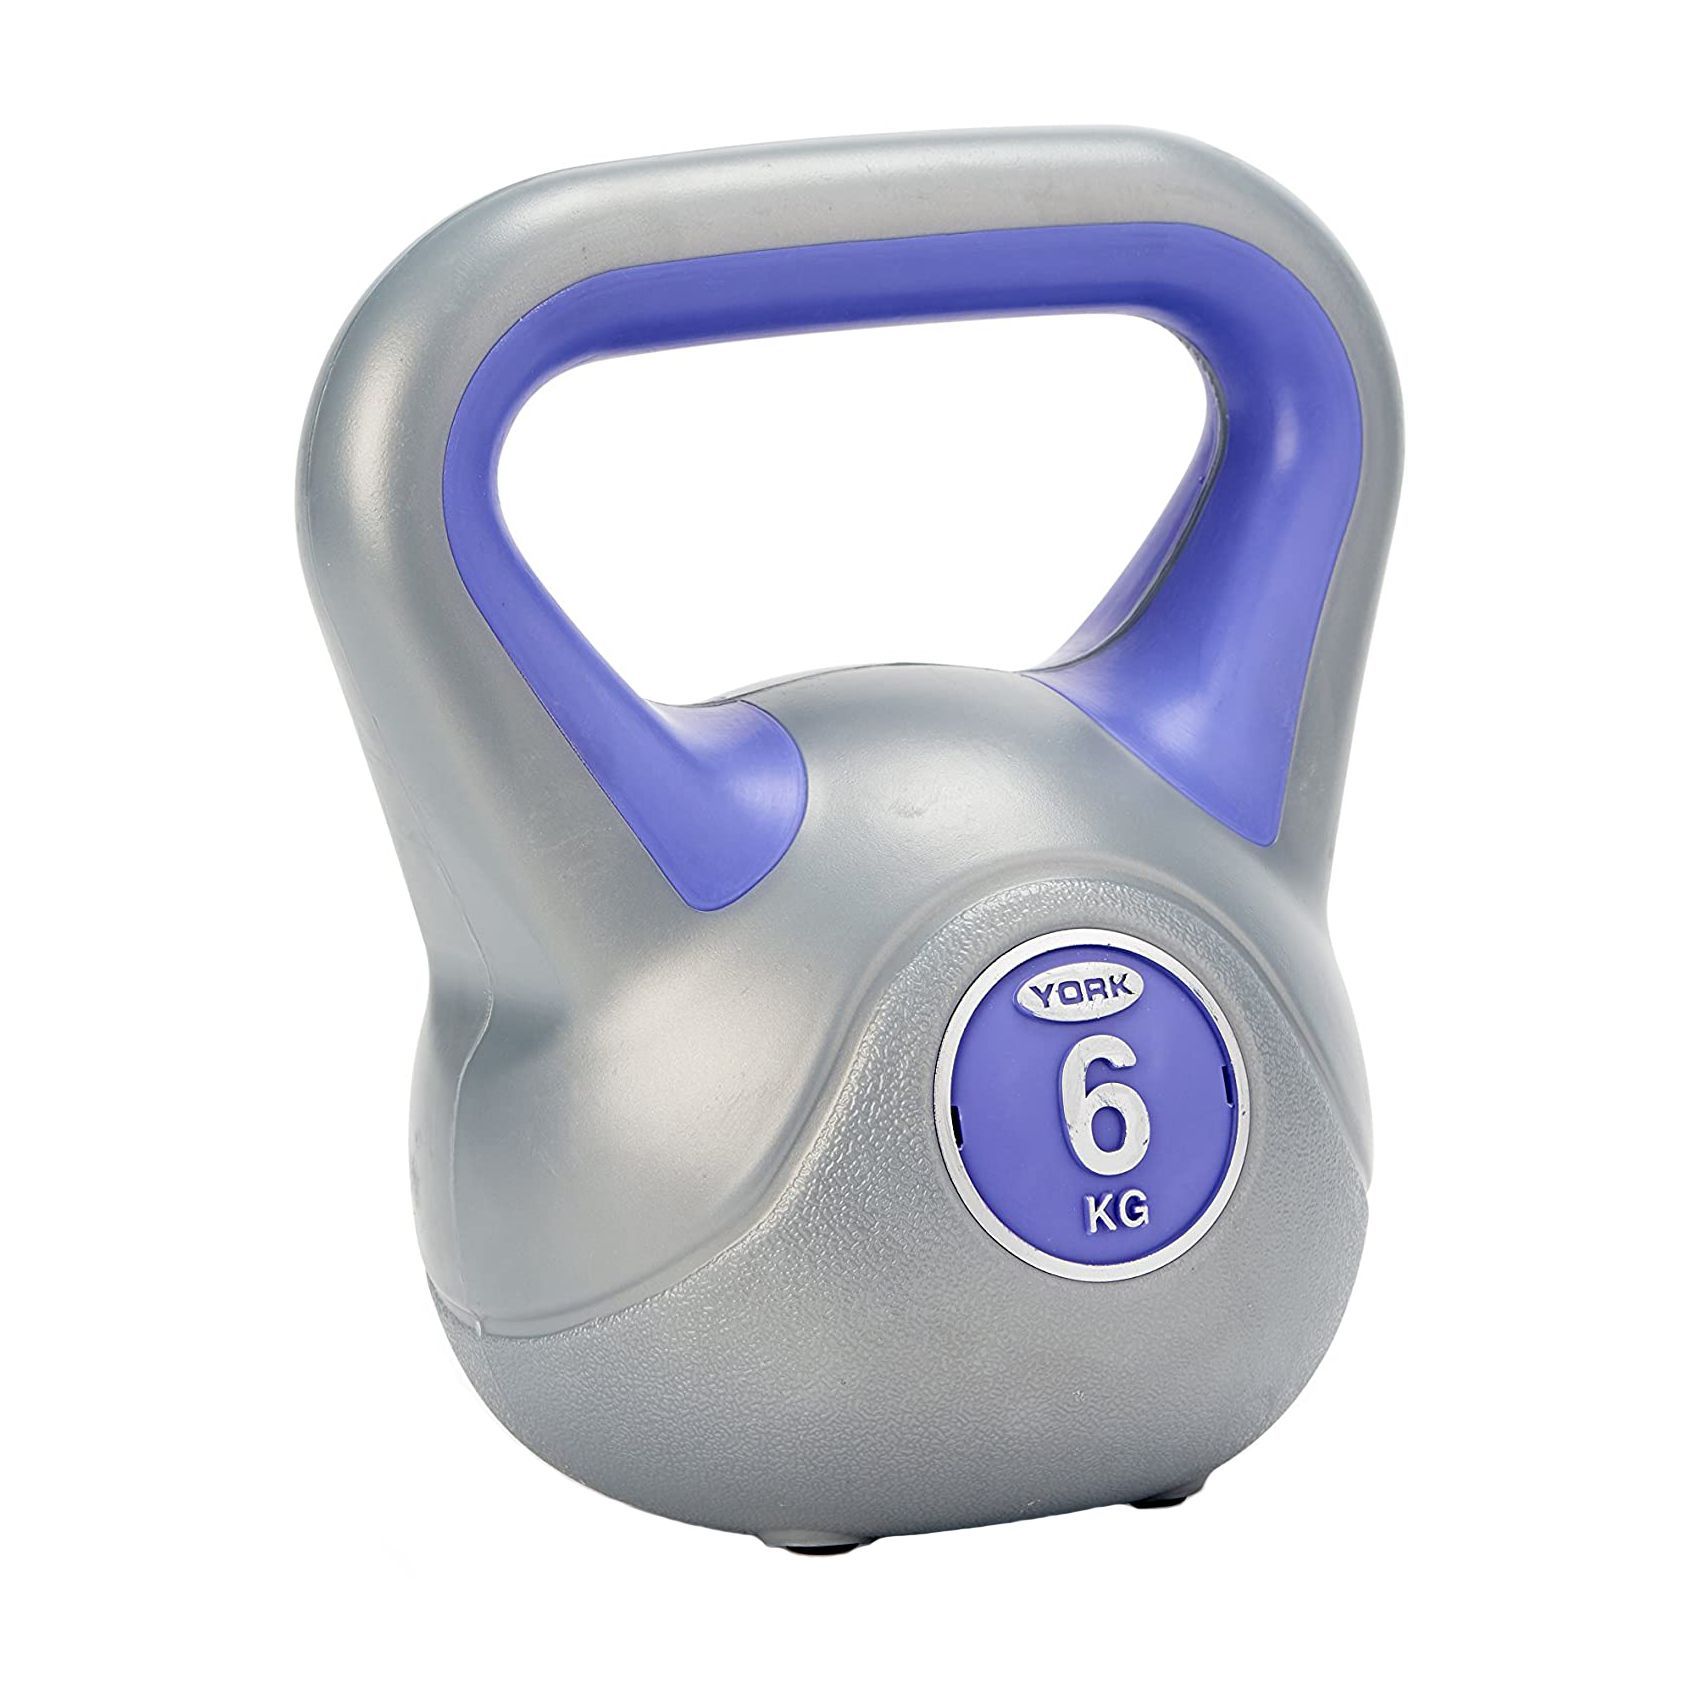 Kettlebells Weight Fitness Training Weight Home Gym Weight 2.5kg Special Offer 